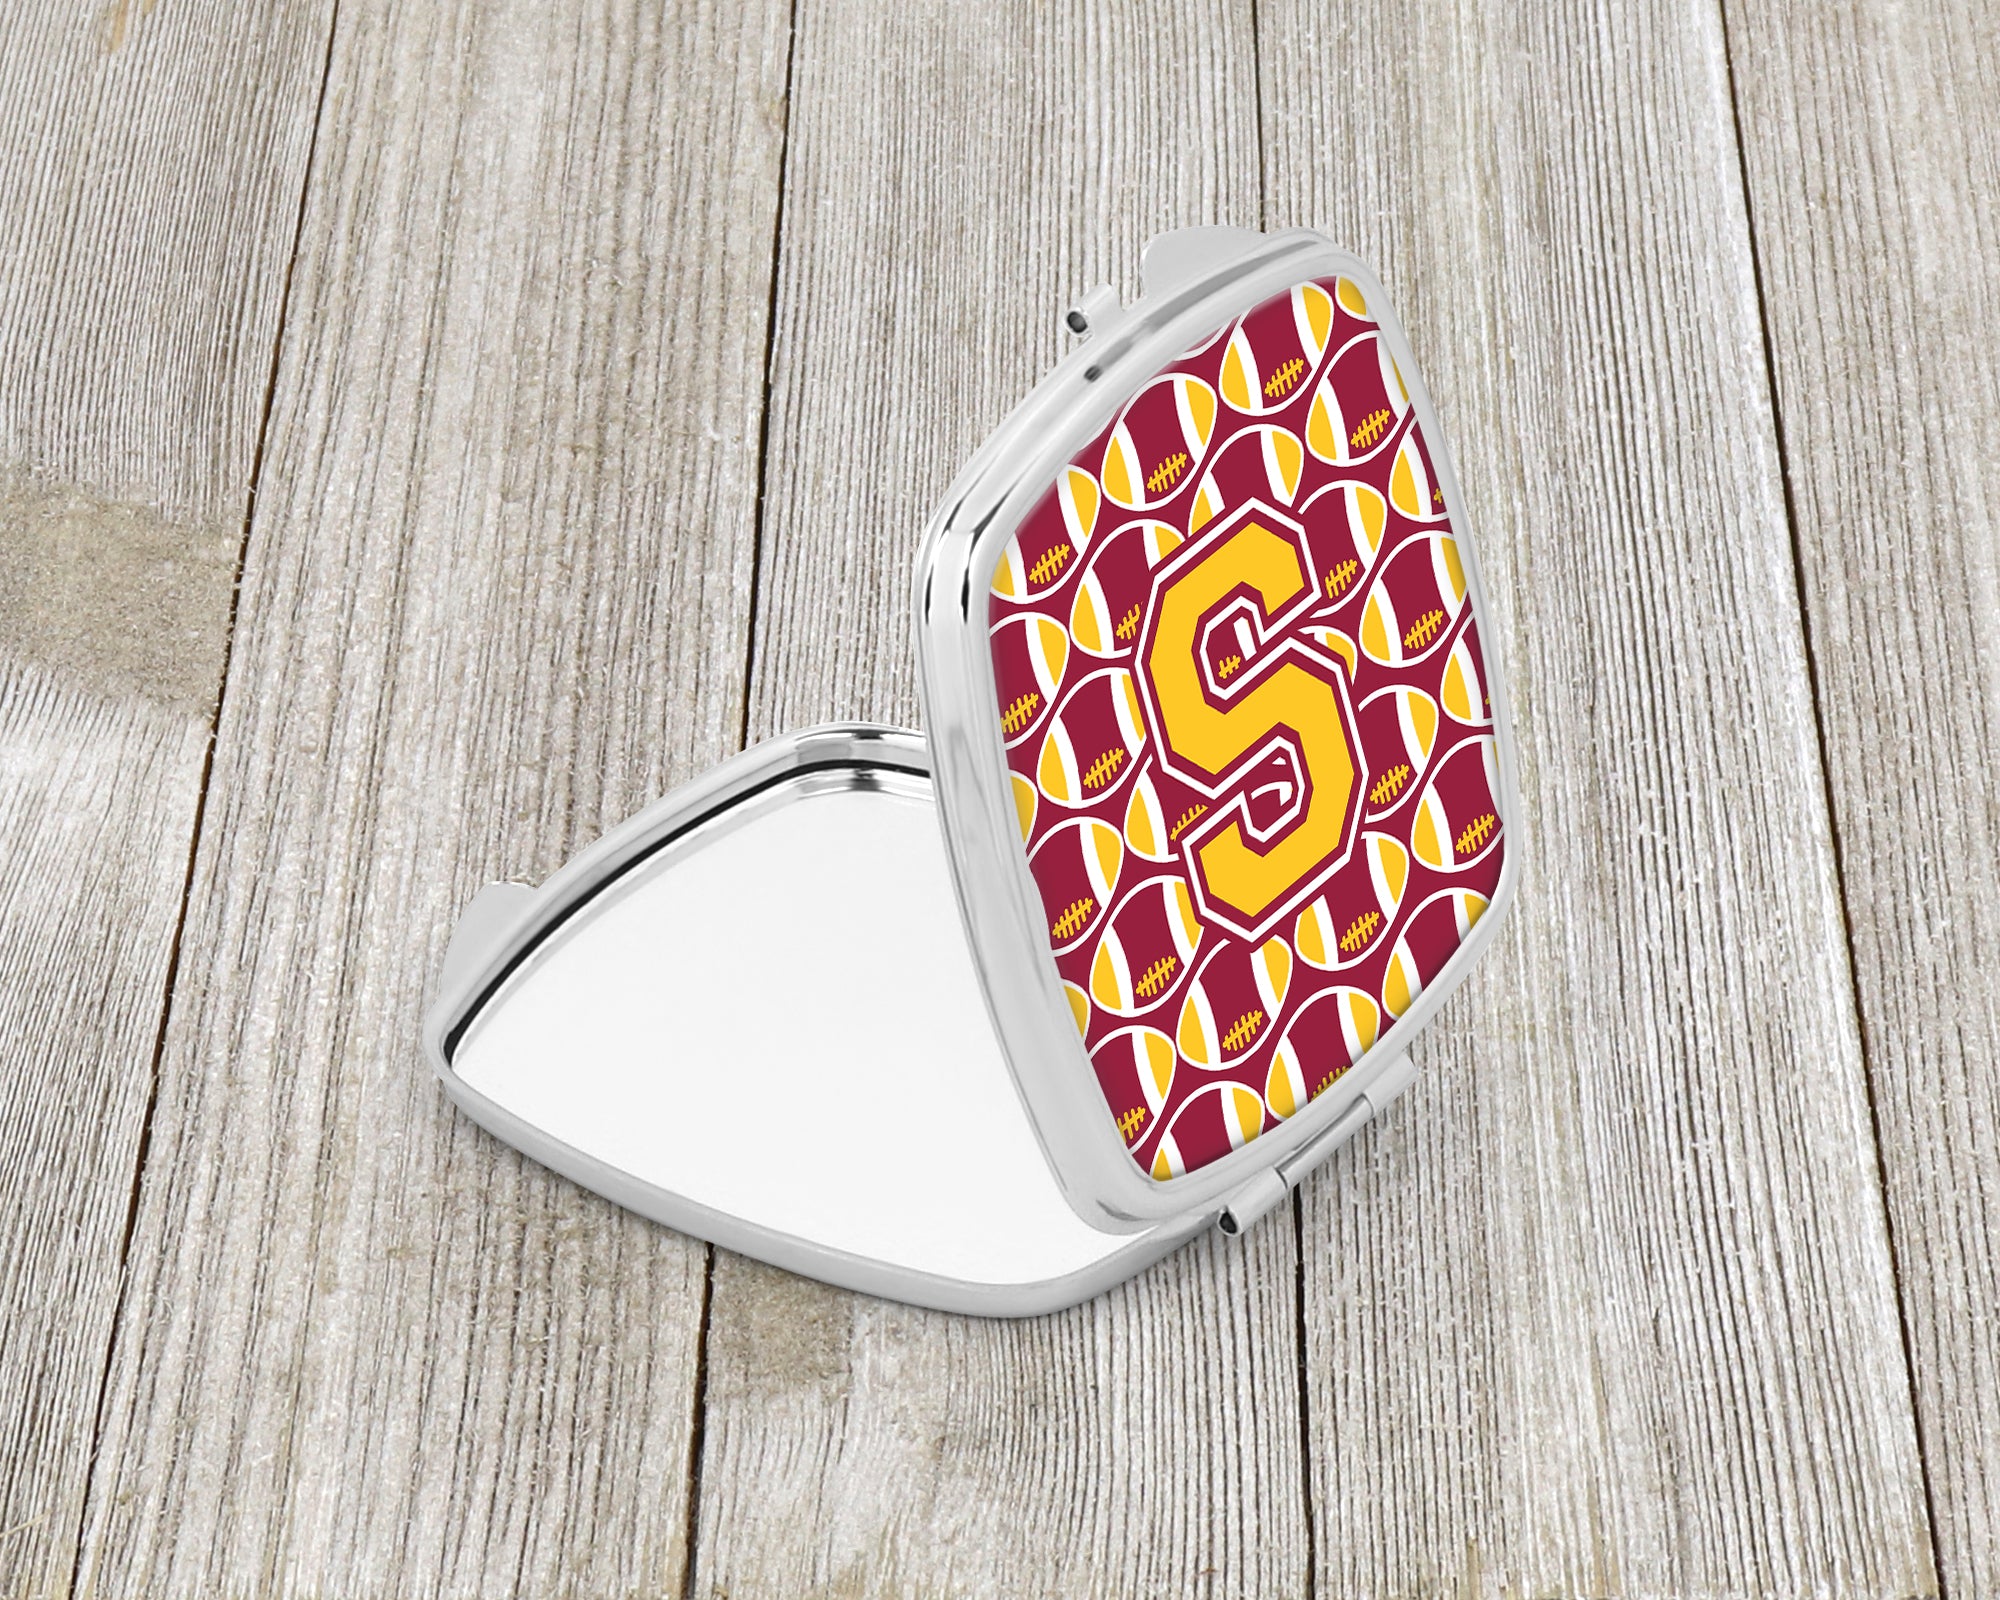 Letter S Football Maroon and Gold Compact Mirror CJ1081-SSCM